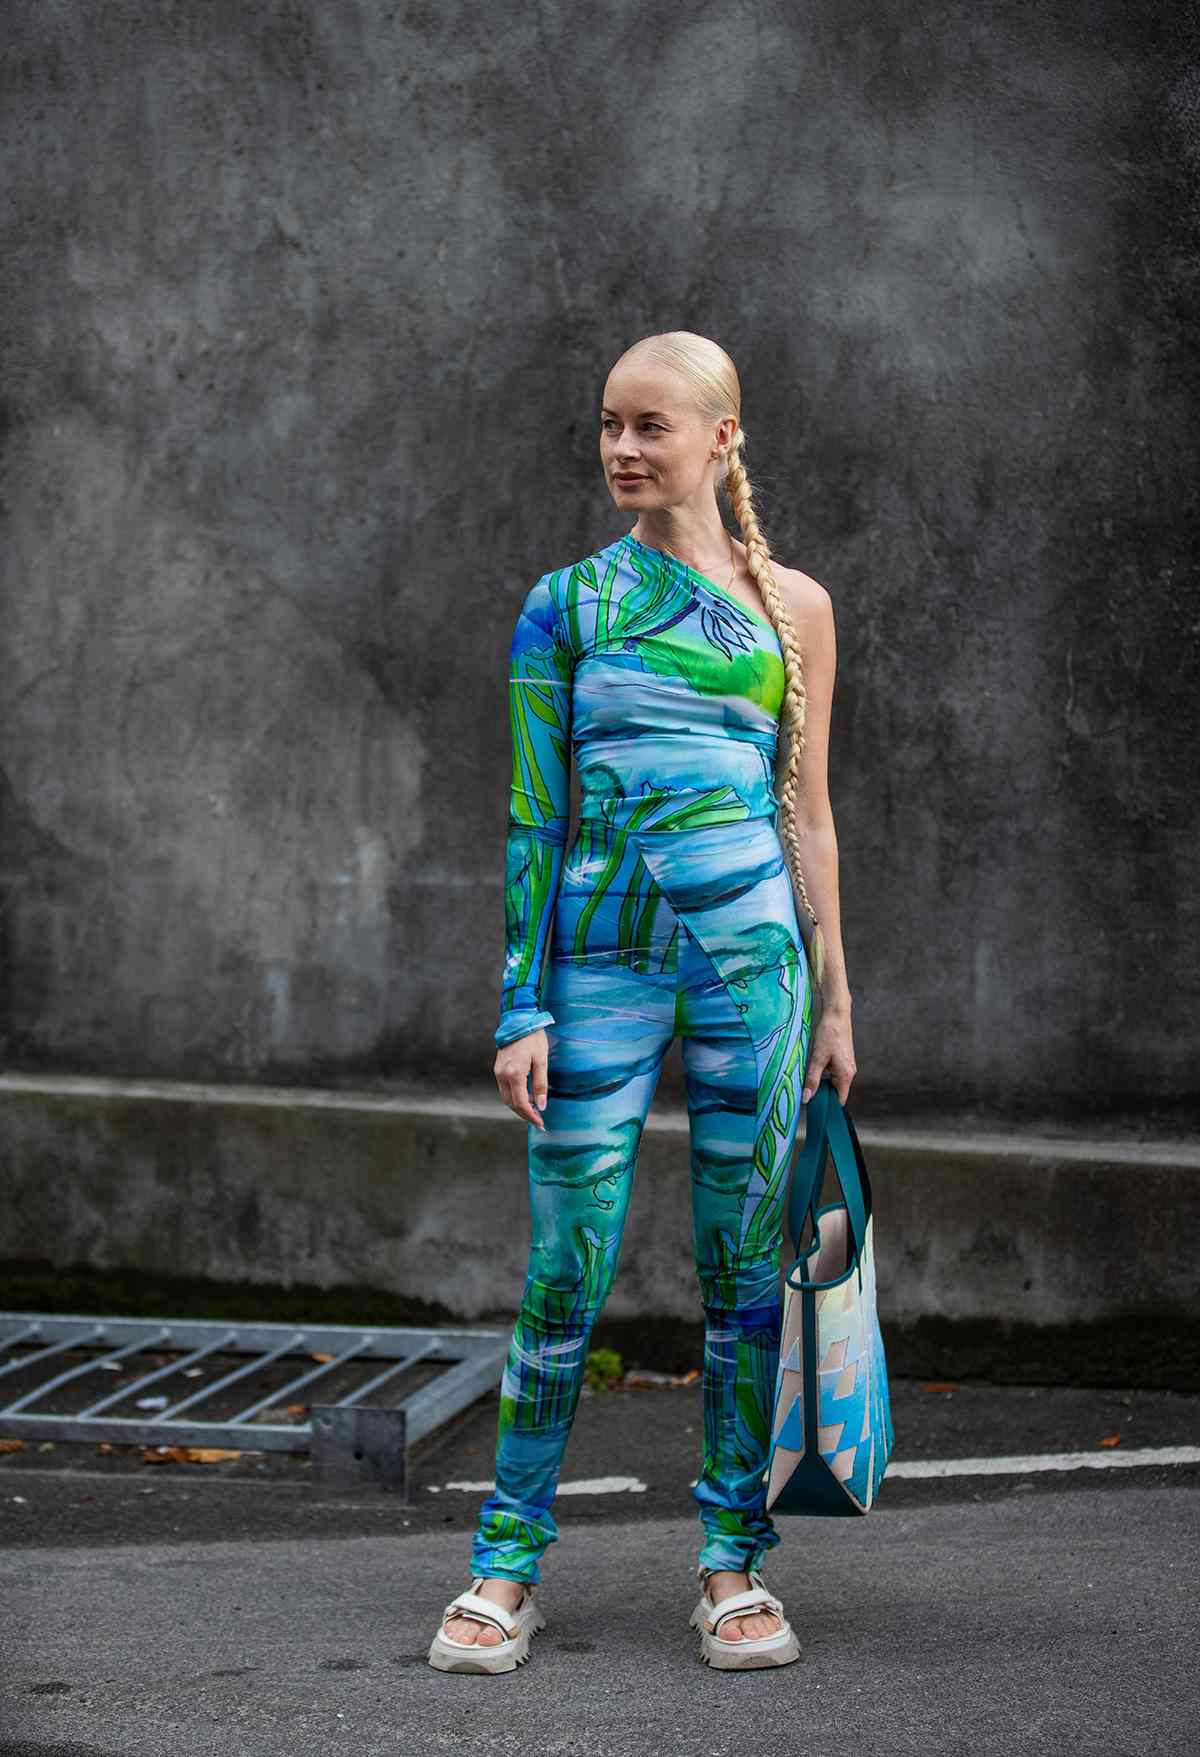 Copenhagen Fashion Week Just Gave Us a Month’s Worth of New Outfit Ideas